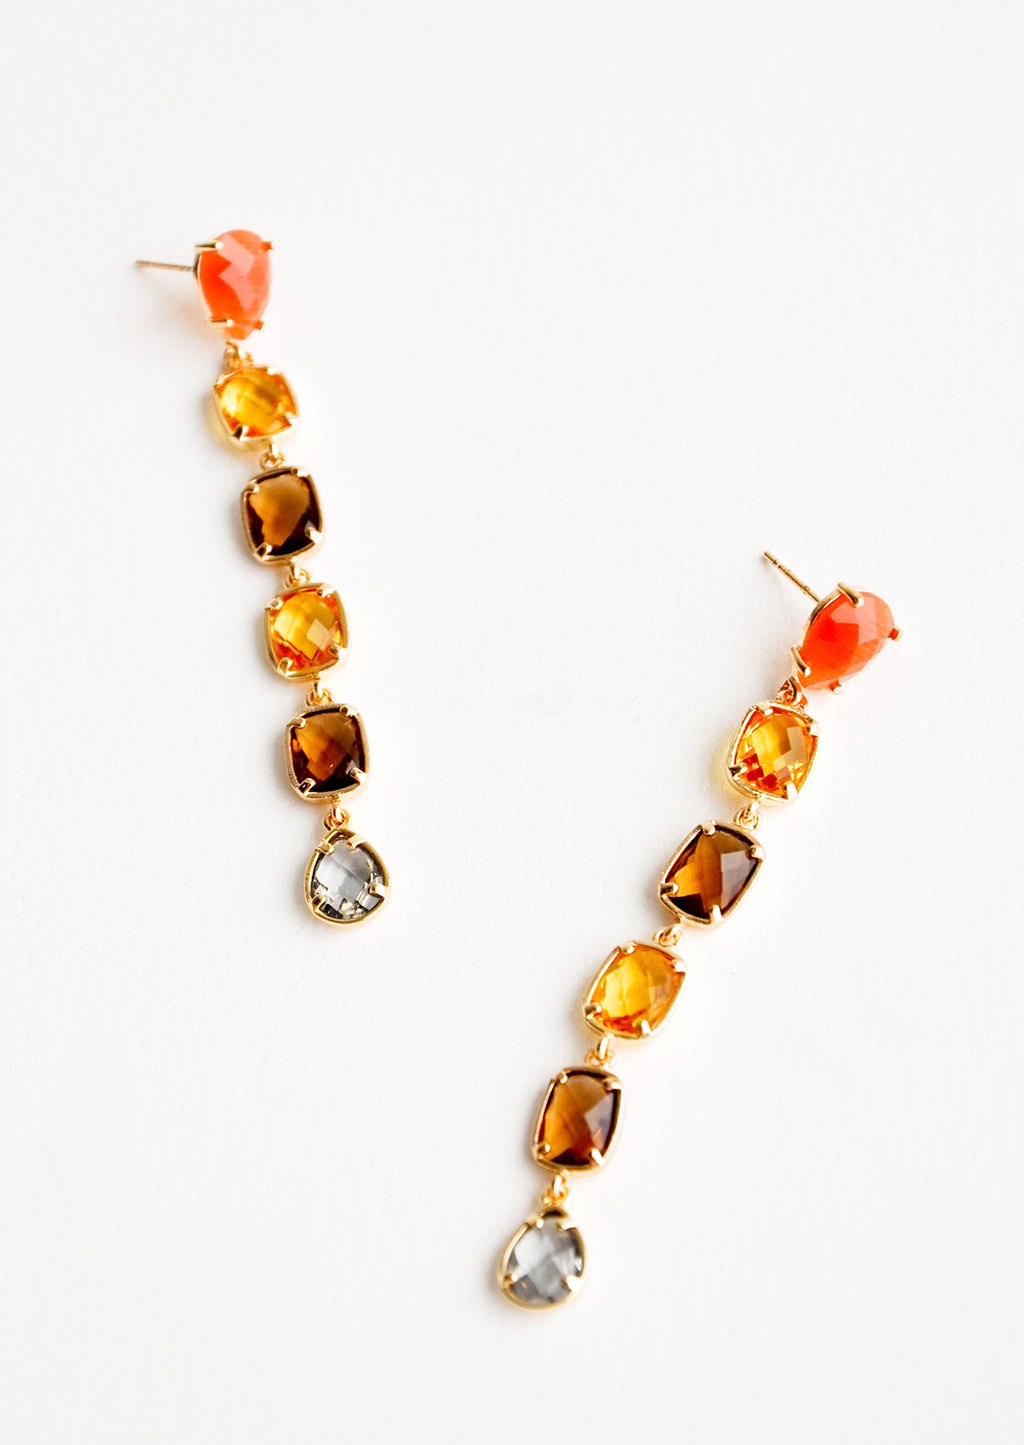 1: Post back drop earrings with six glass crystals of orange, yellow, amber, and blue.